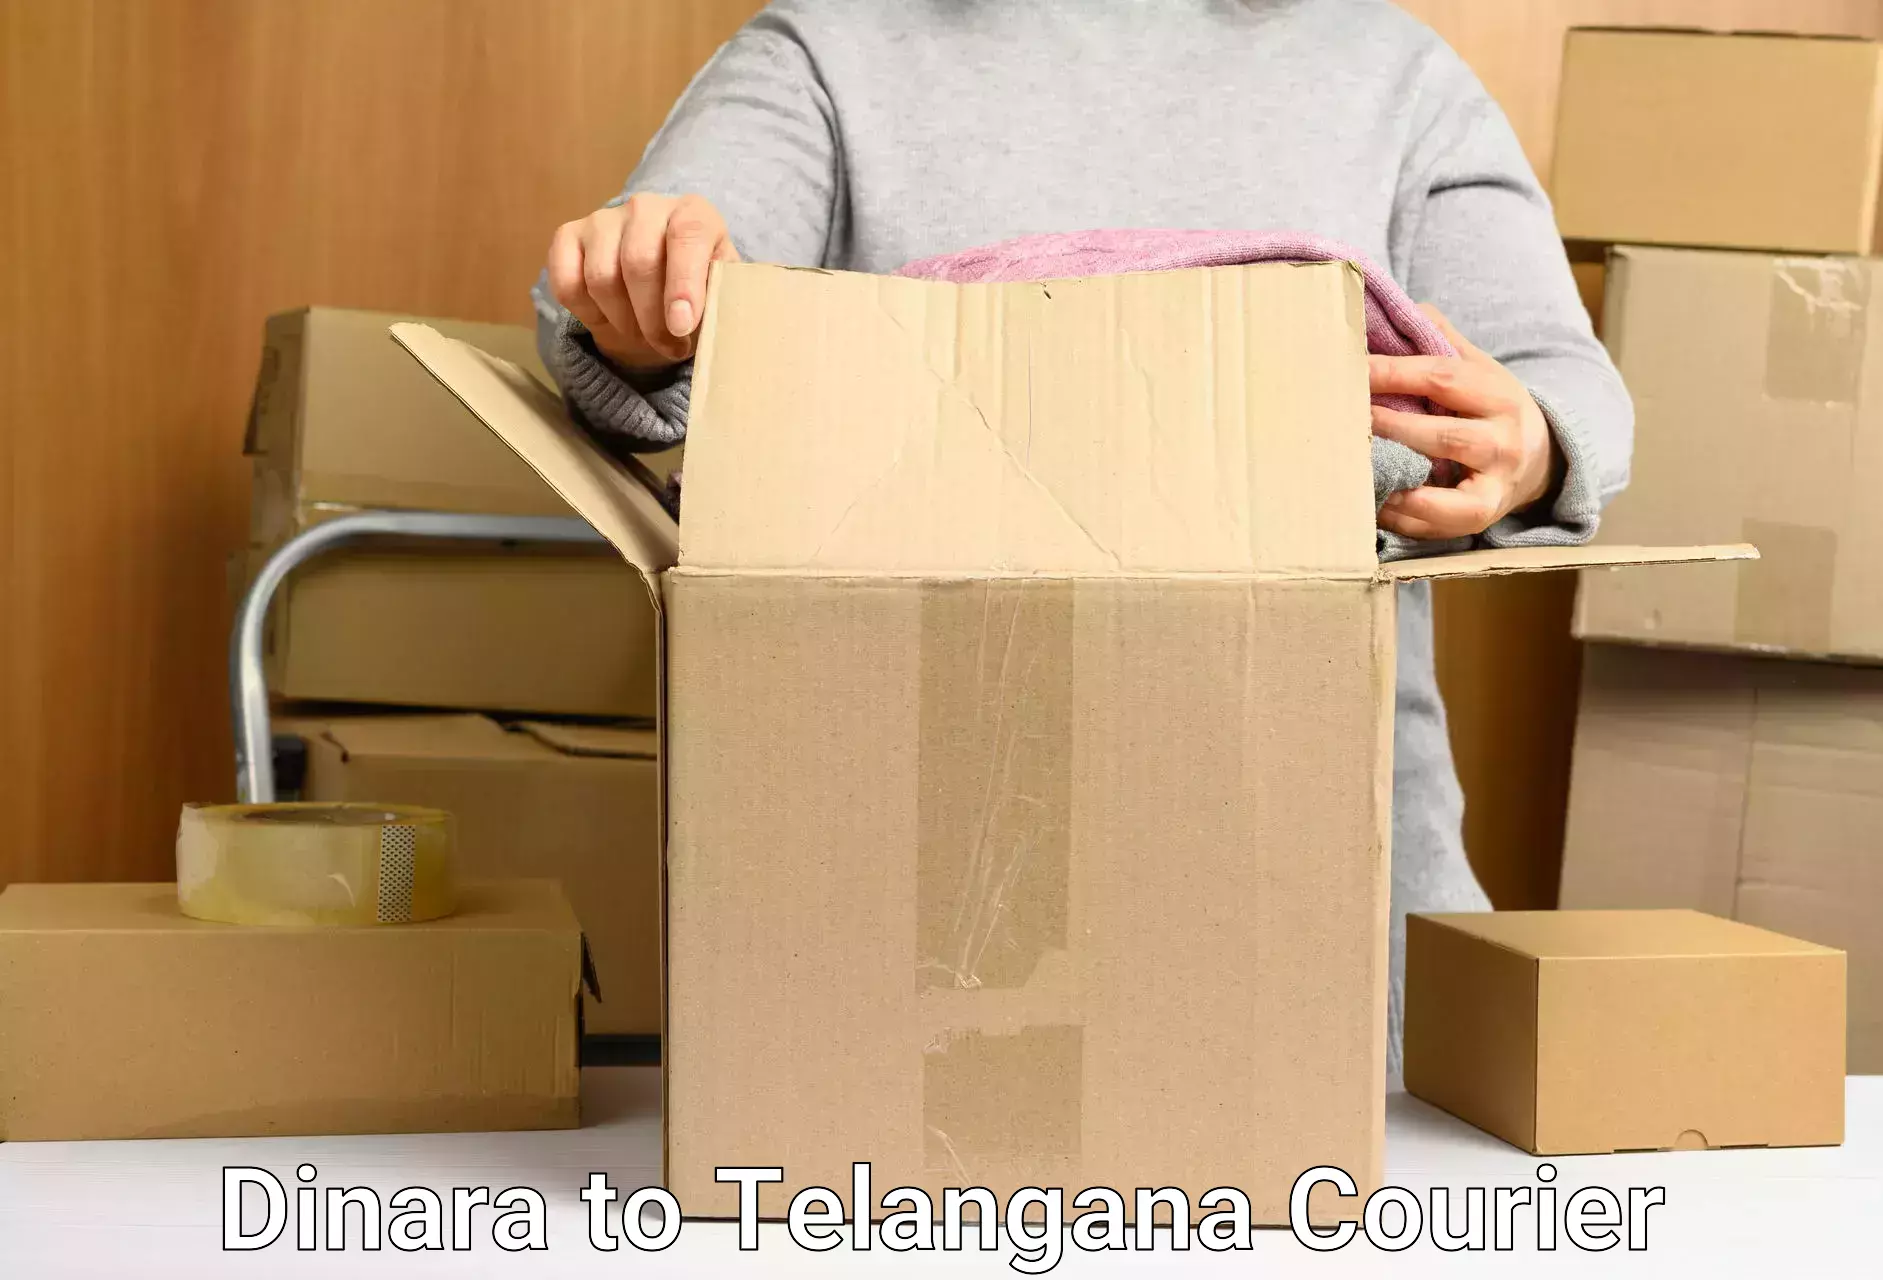 Courier service comparison in Dinara to Secunderabad